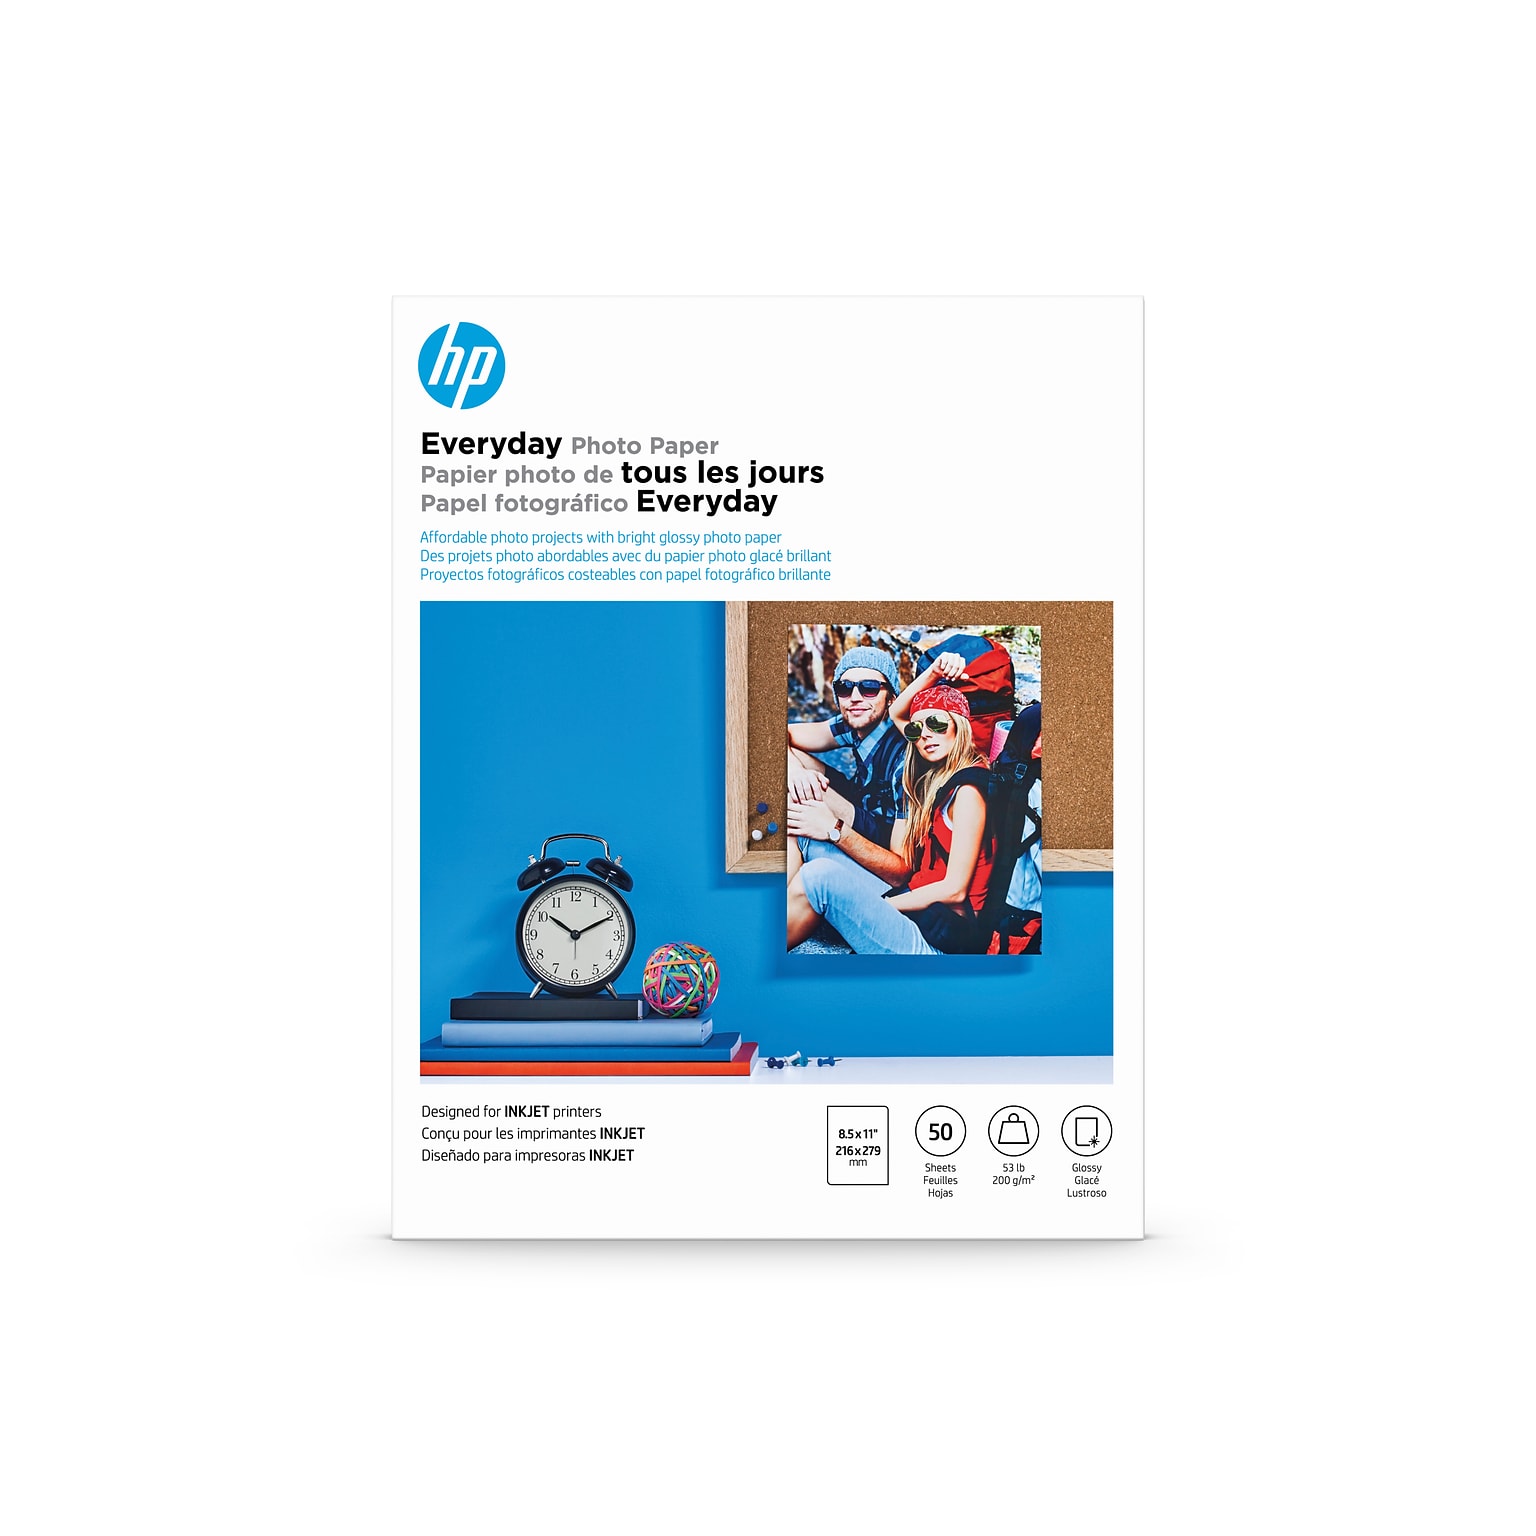 HP Everyday Glossy Photo Paper, 8.5 x 11, 50 Sheet/Pack (Q8723A)